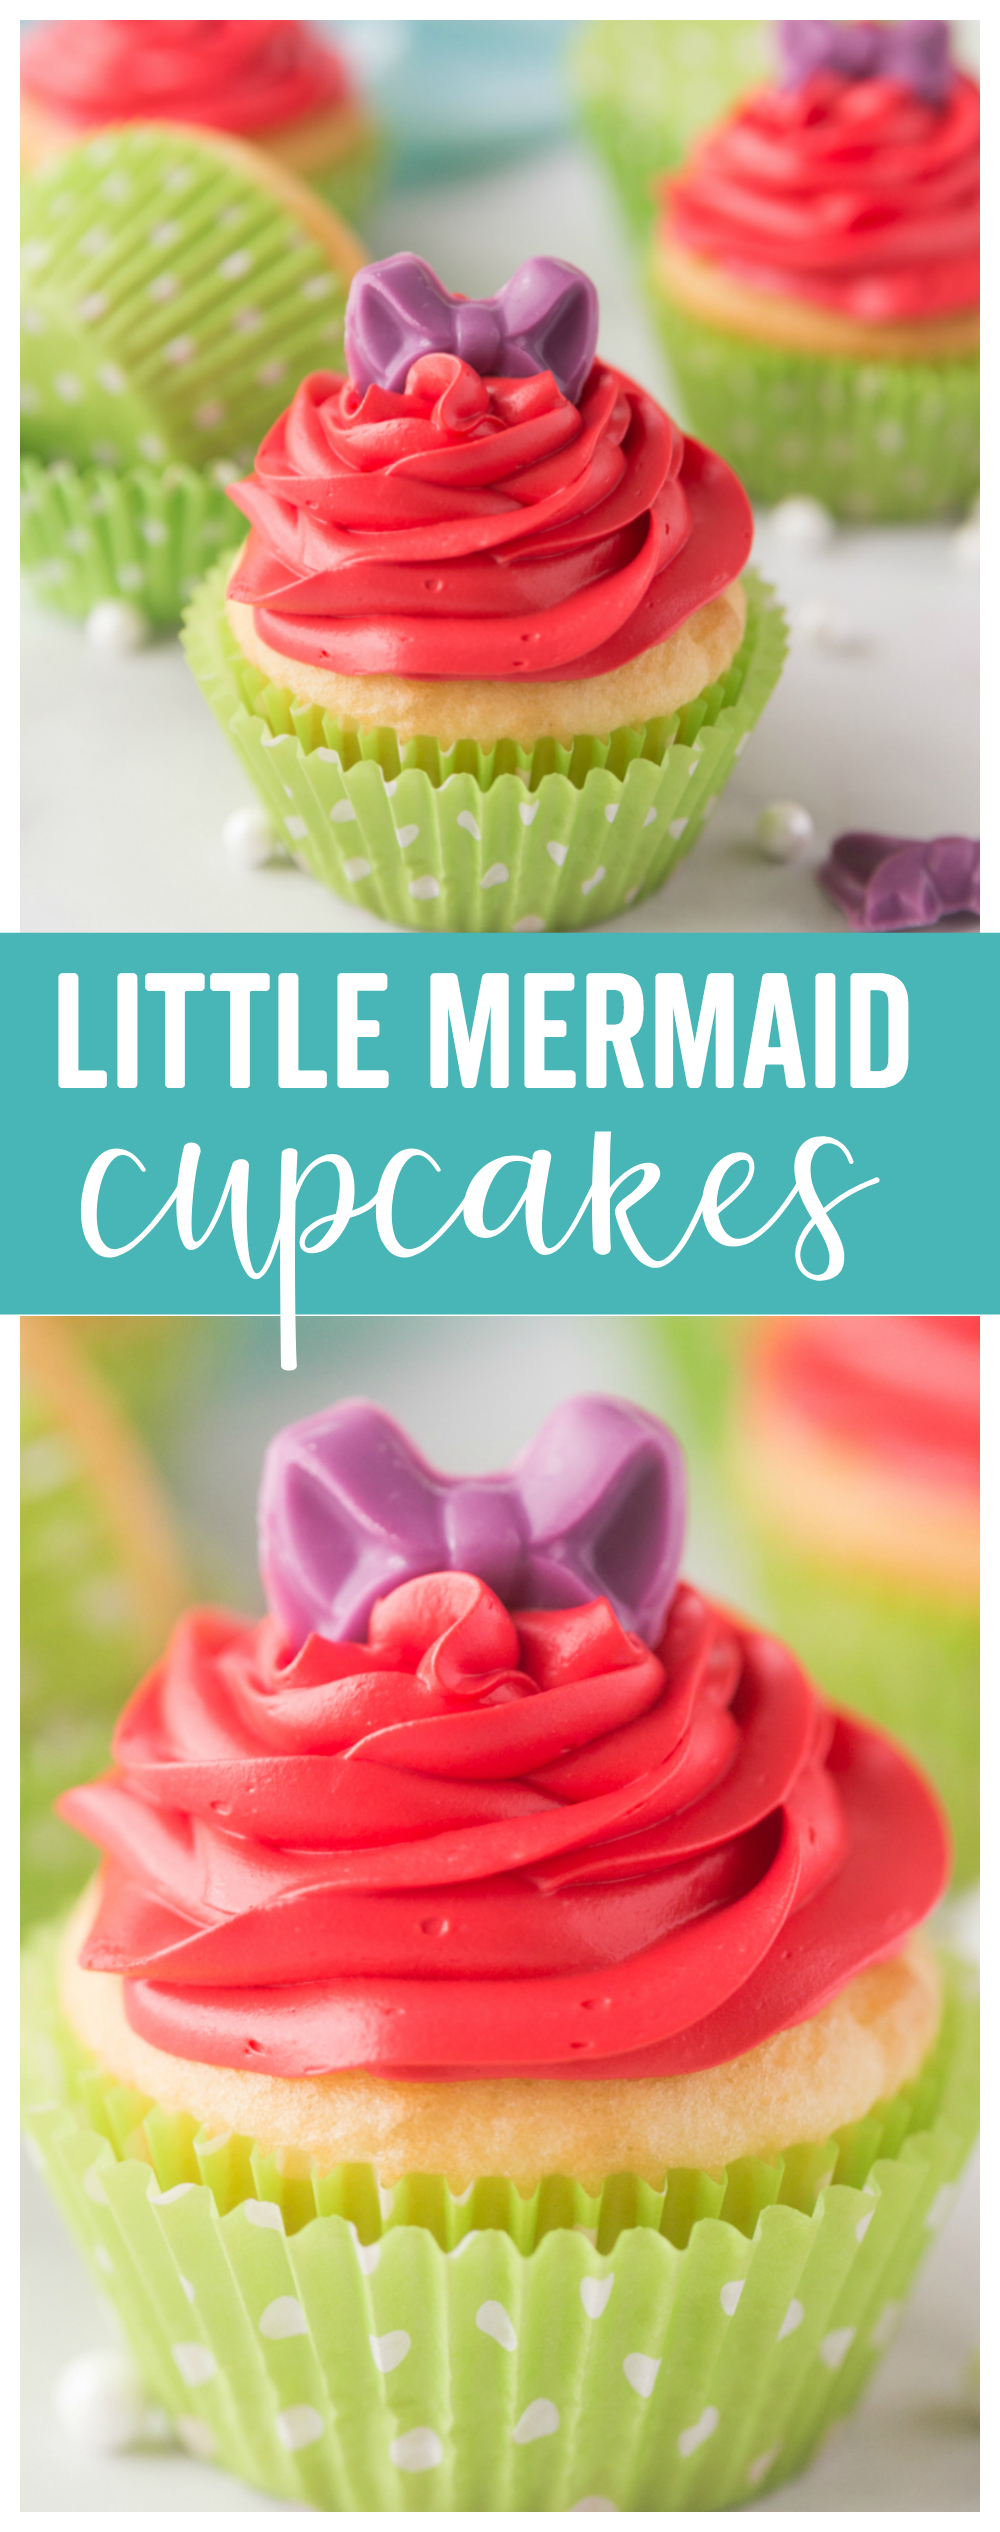 Little Mermaid Cupcakes are the perfect tasty cupcake treat for any Ariel, The Little Mermaid, party!